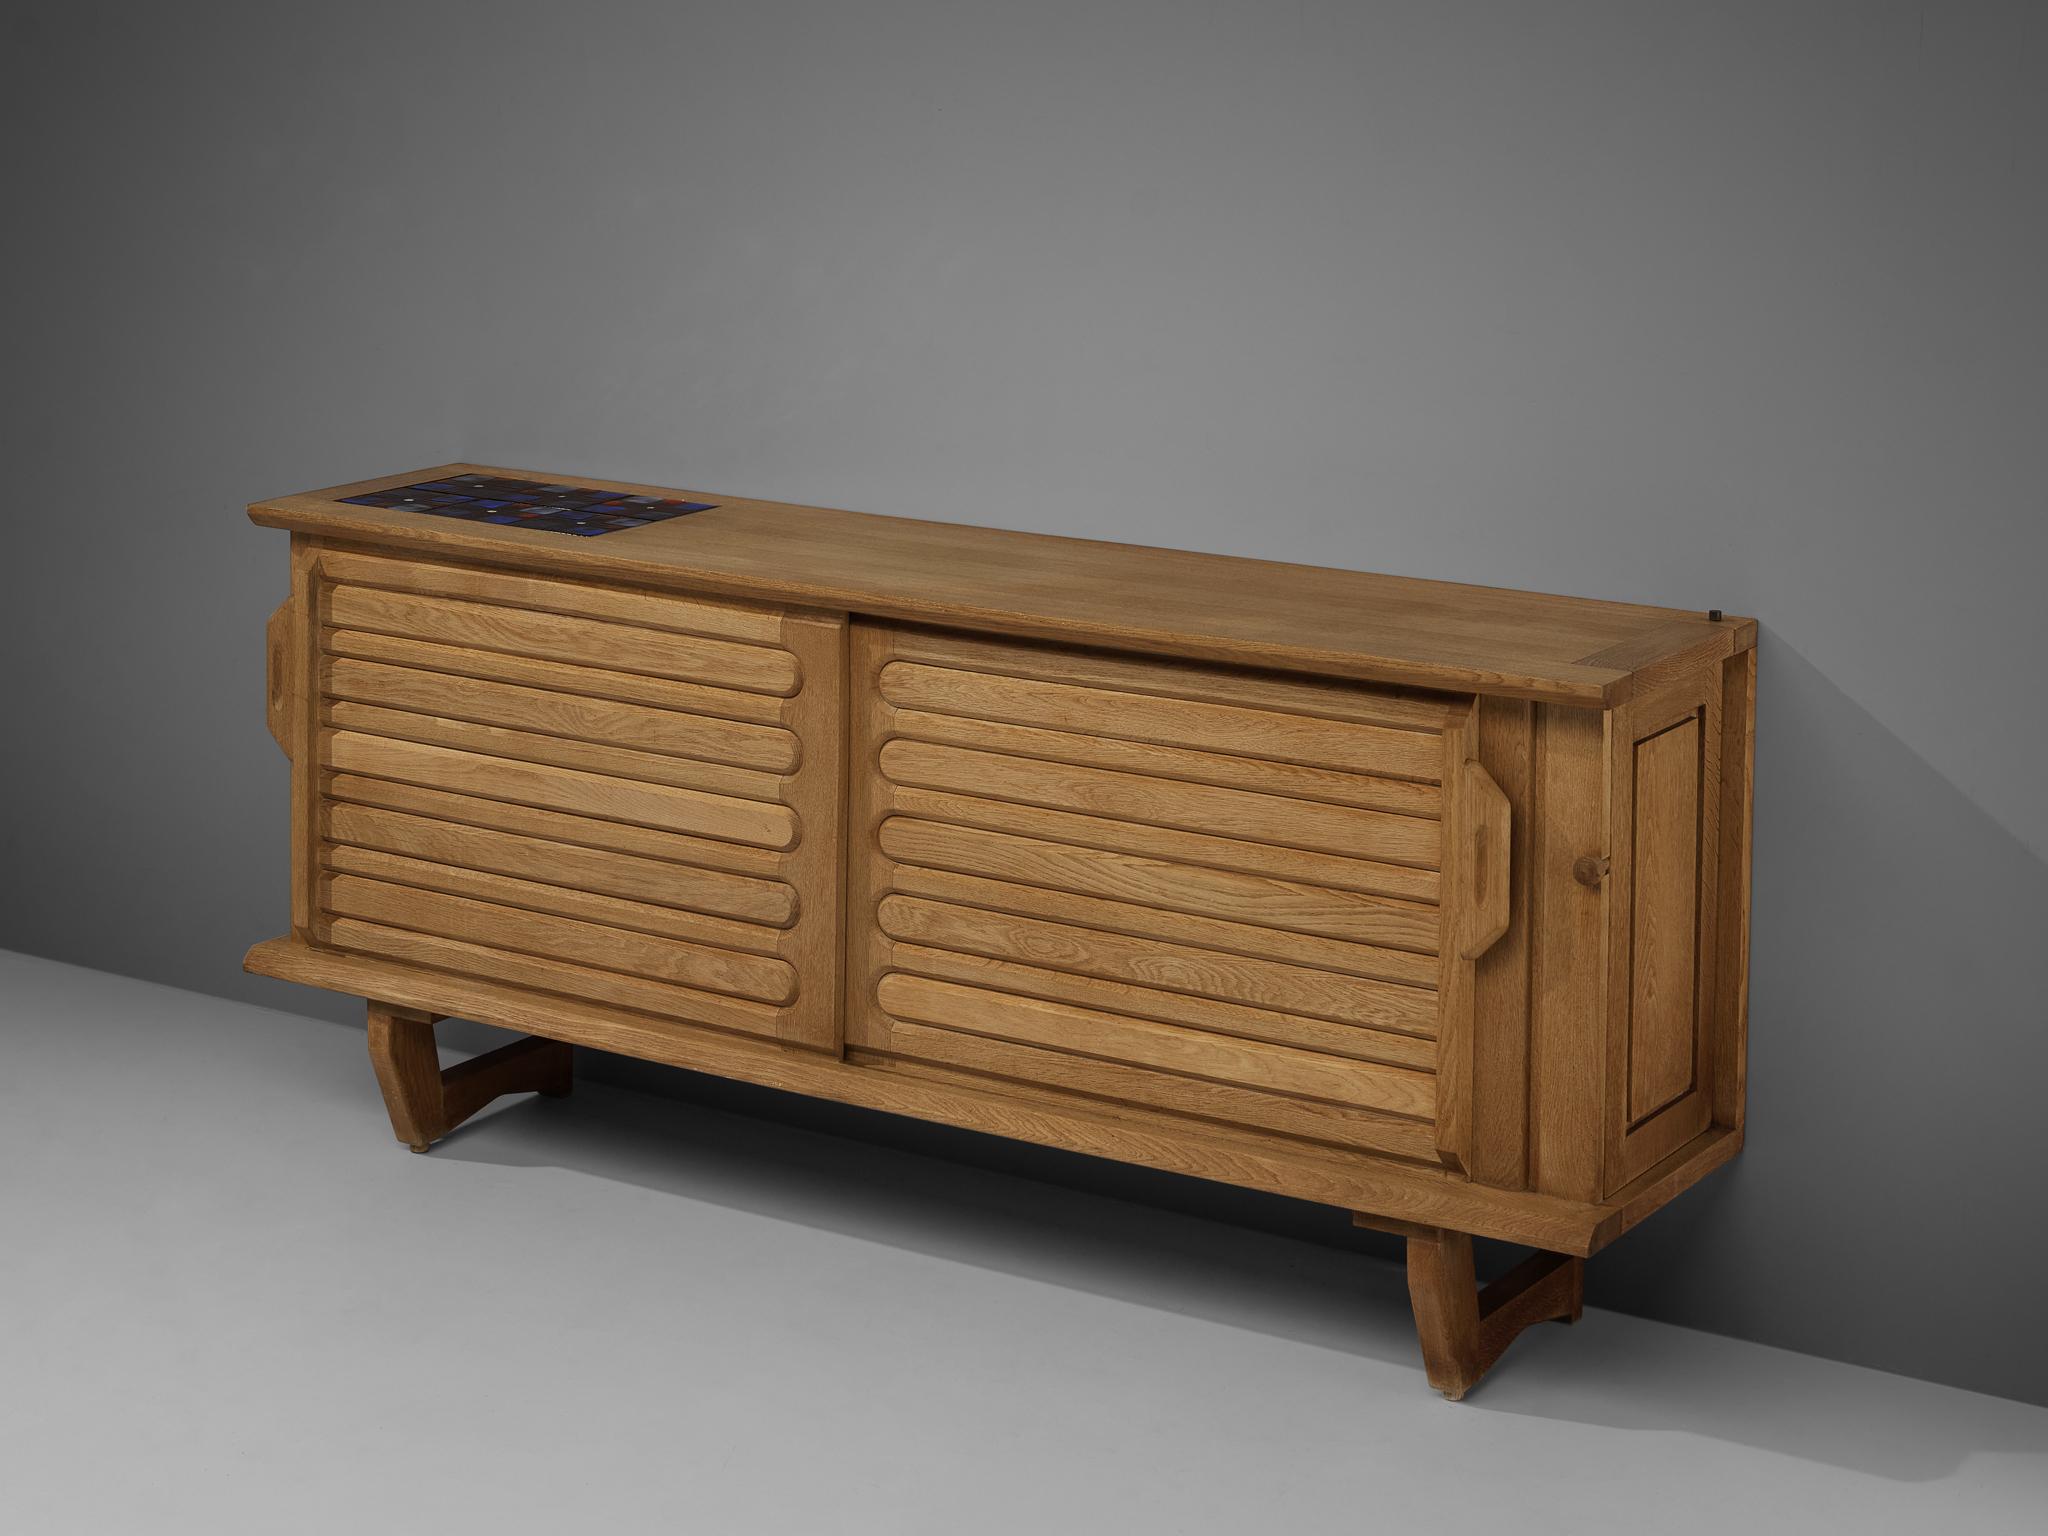 Guillerme & Chambron Sideboard in Oak and Ceramic Tiles 1